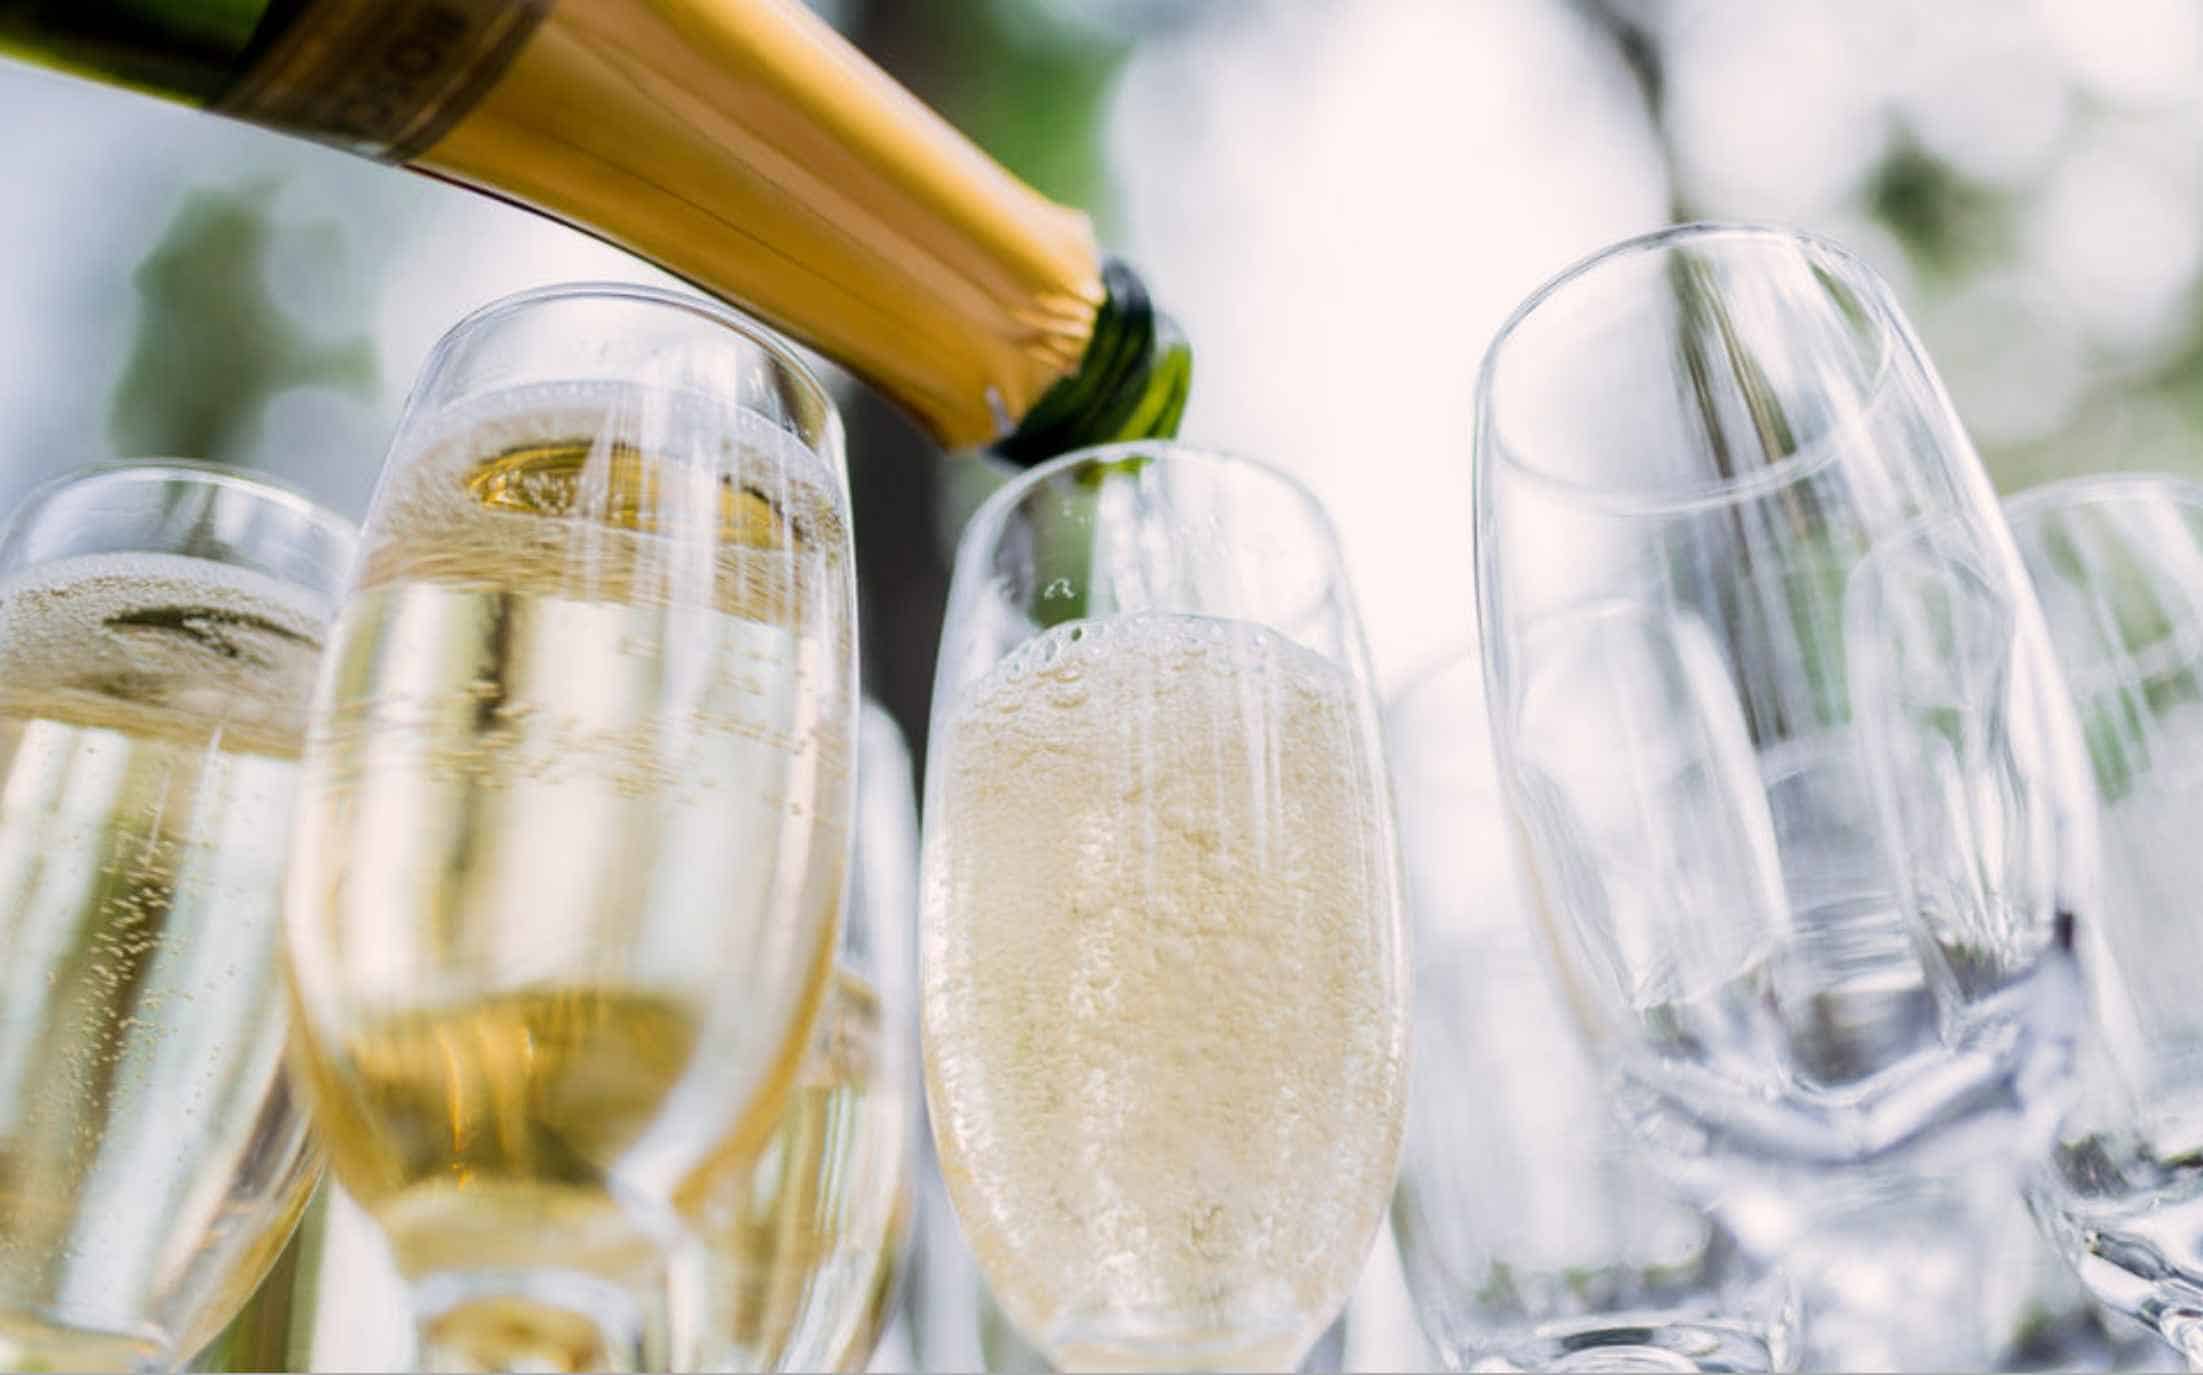 Nutrition Facts of Prosecco Wine